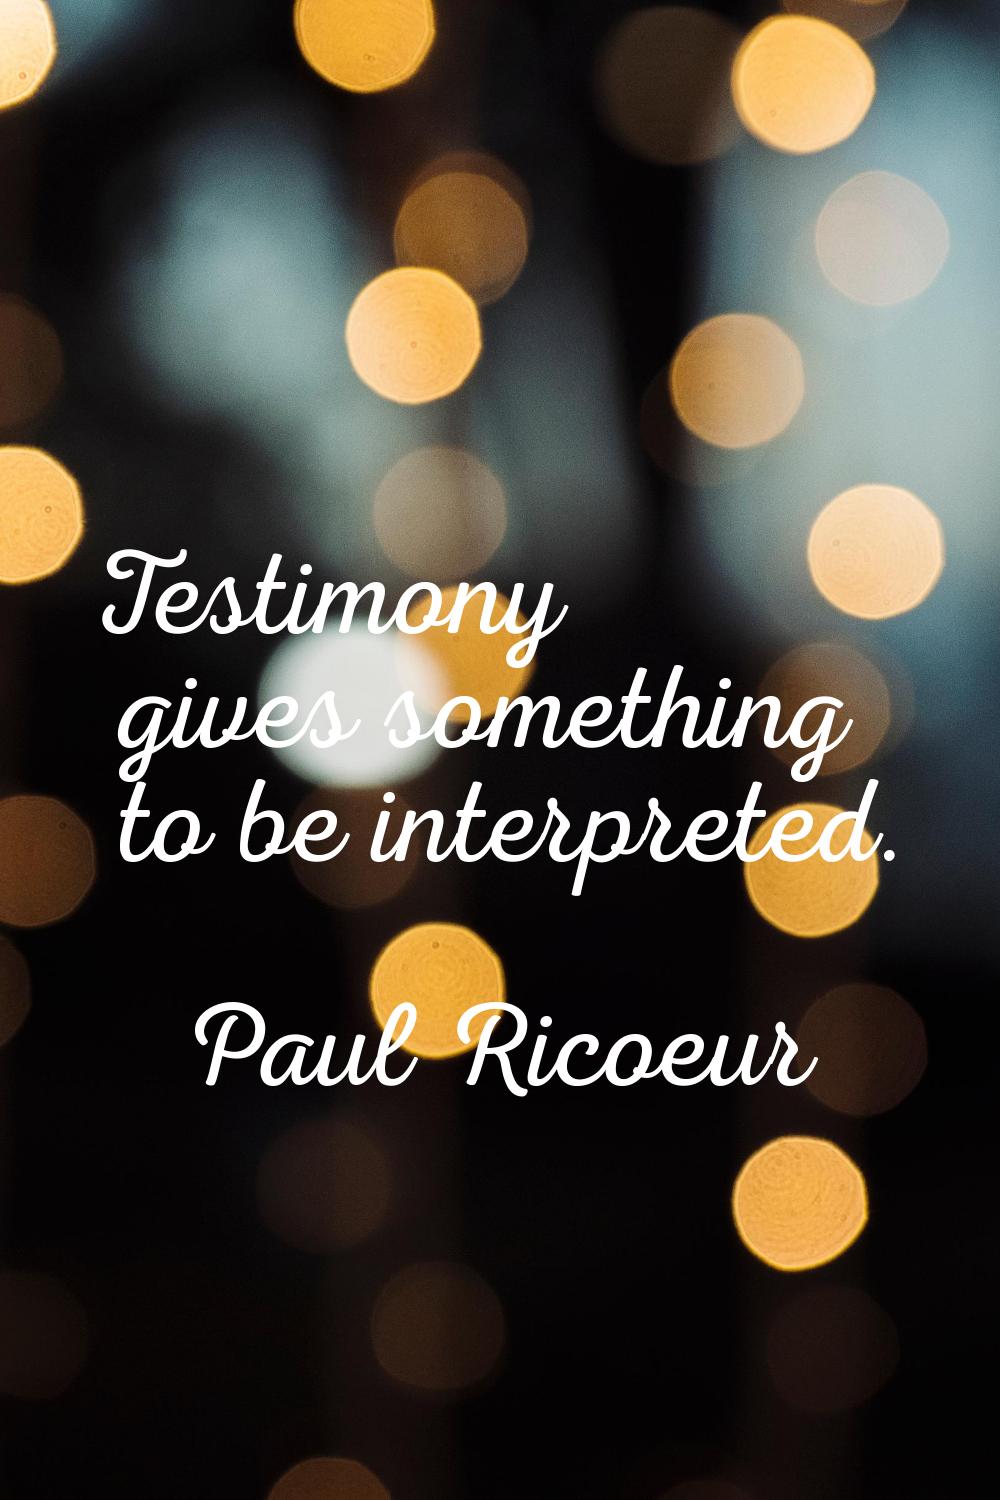 Testimony gives something to be interpreted.